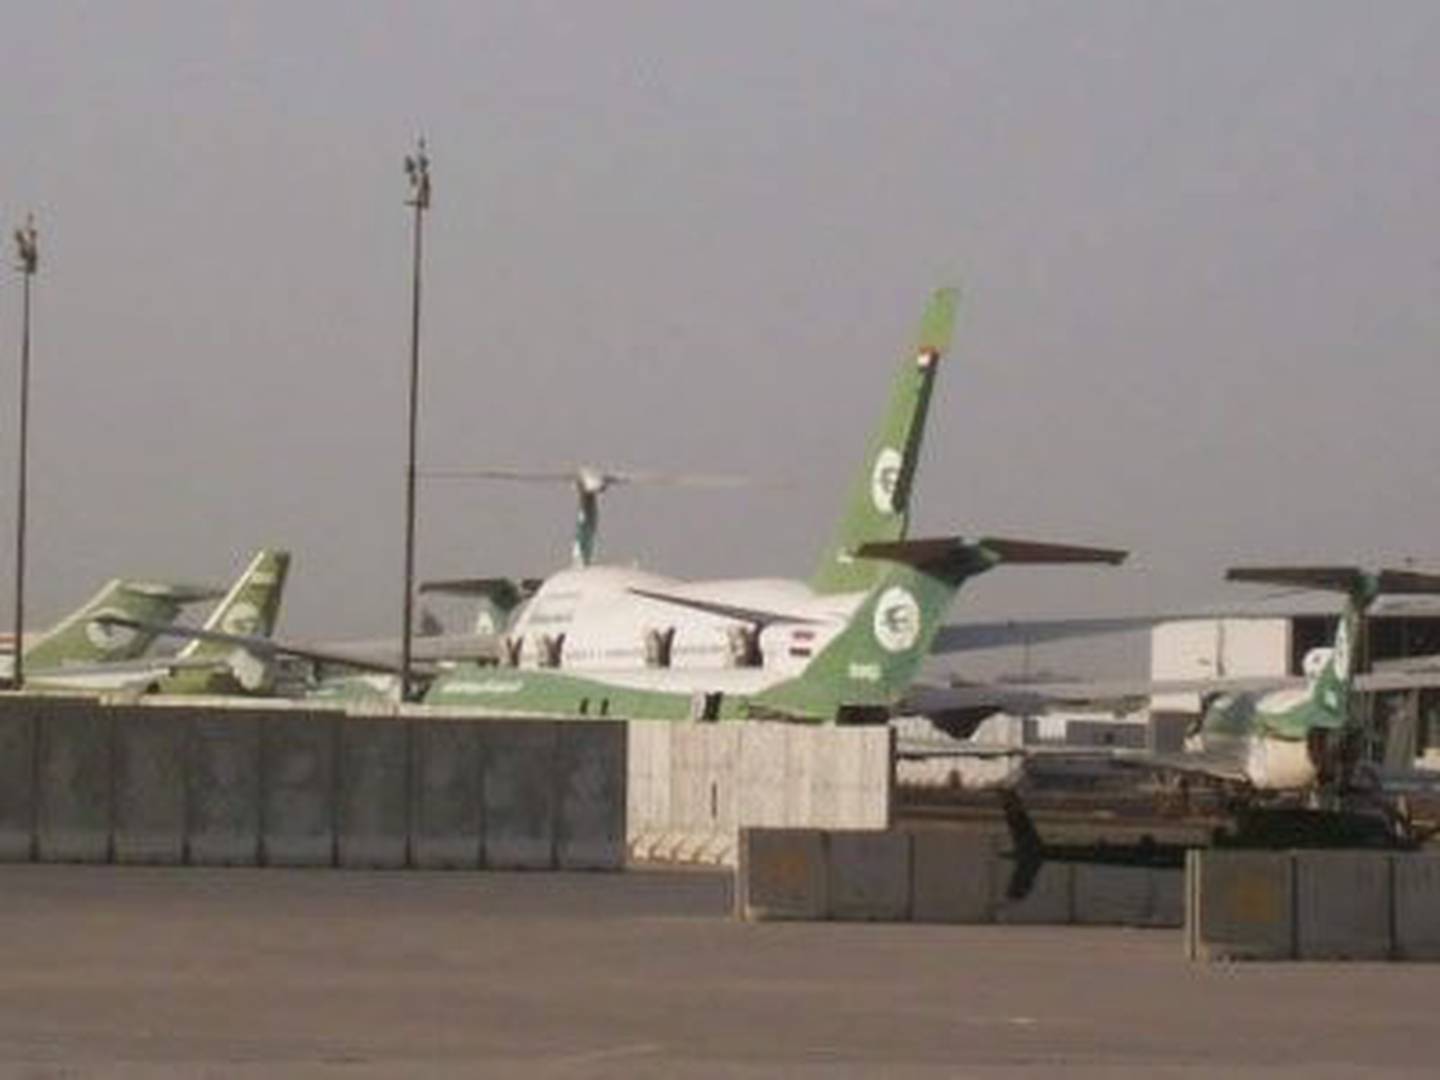 Aircraft parked next to Sadam’s own 747 and other aircraft.